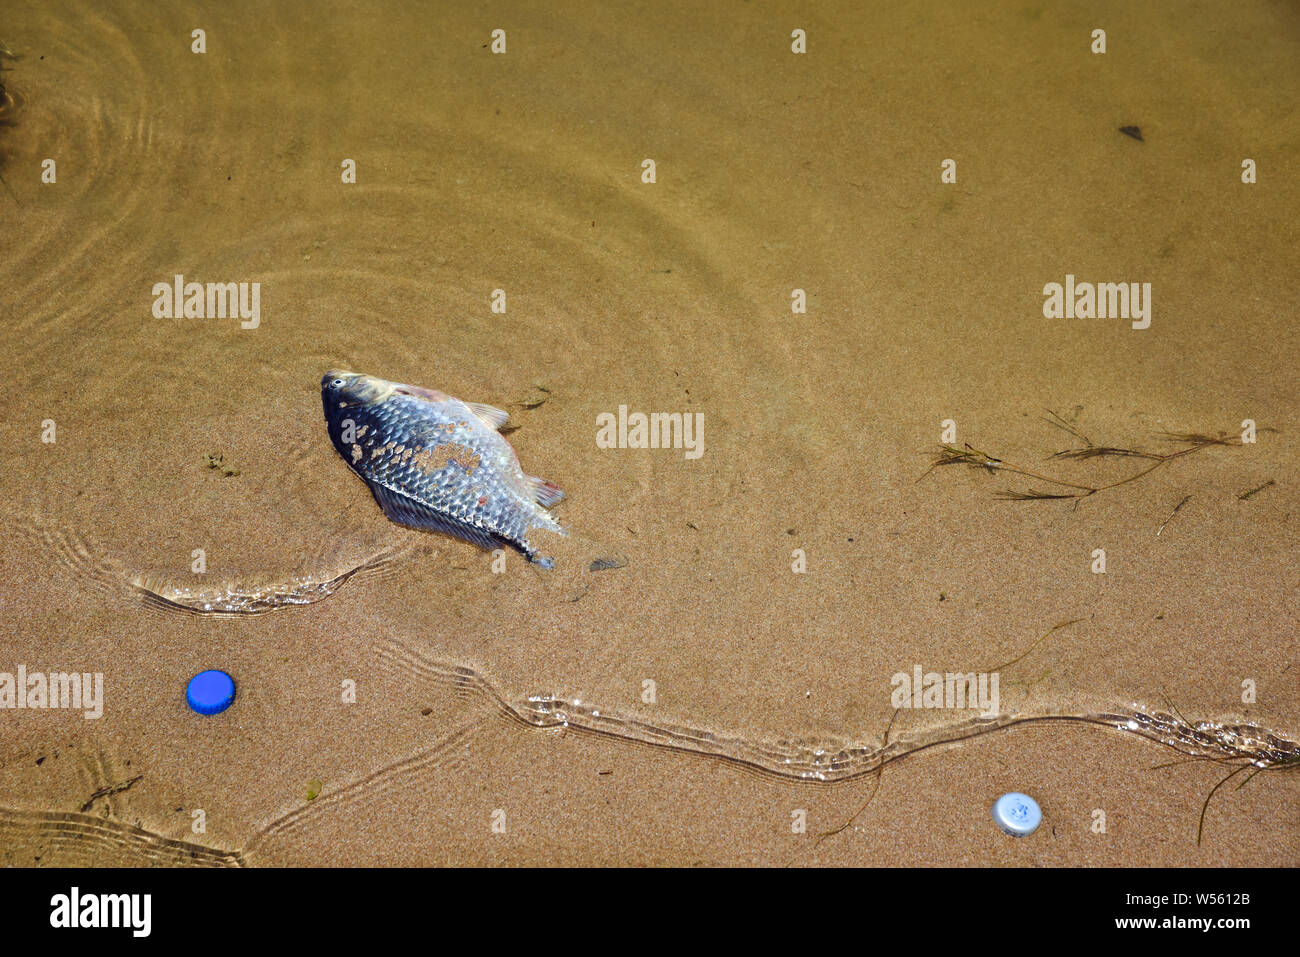 A dead fish and plastic covers in a beach inside water. This image could be useful for environmental concepts. Stock Photo